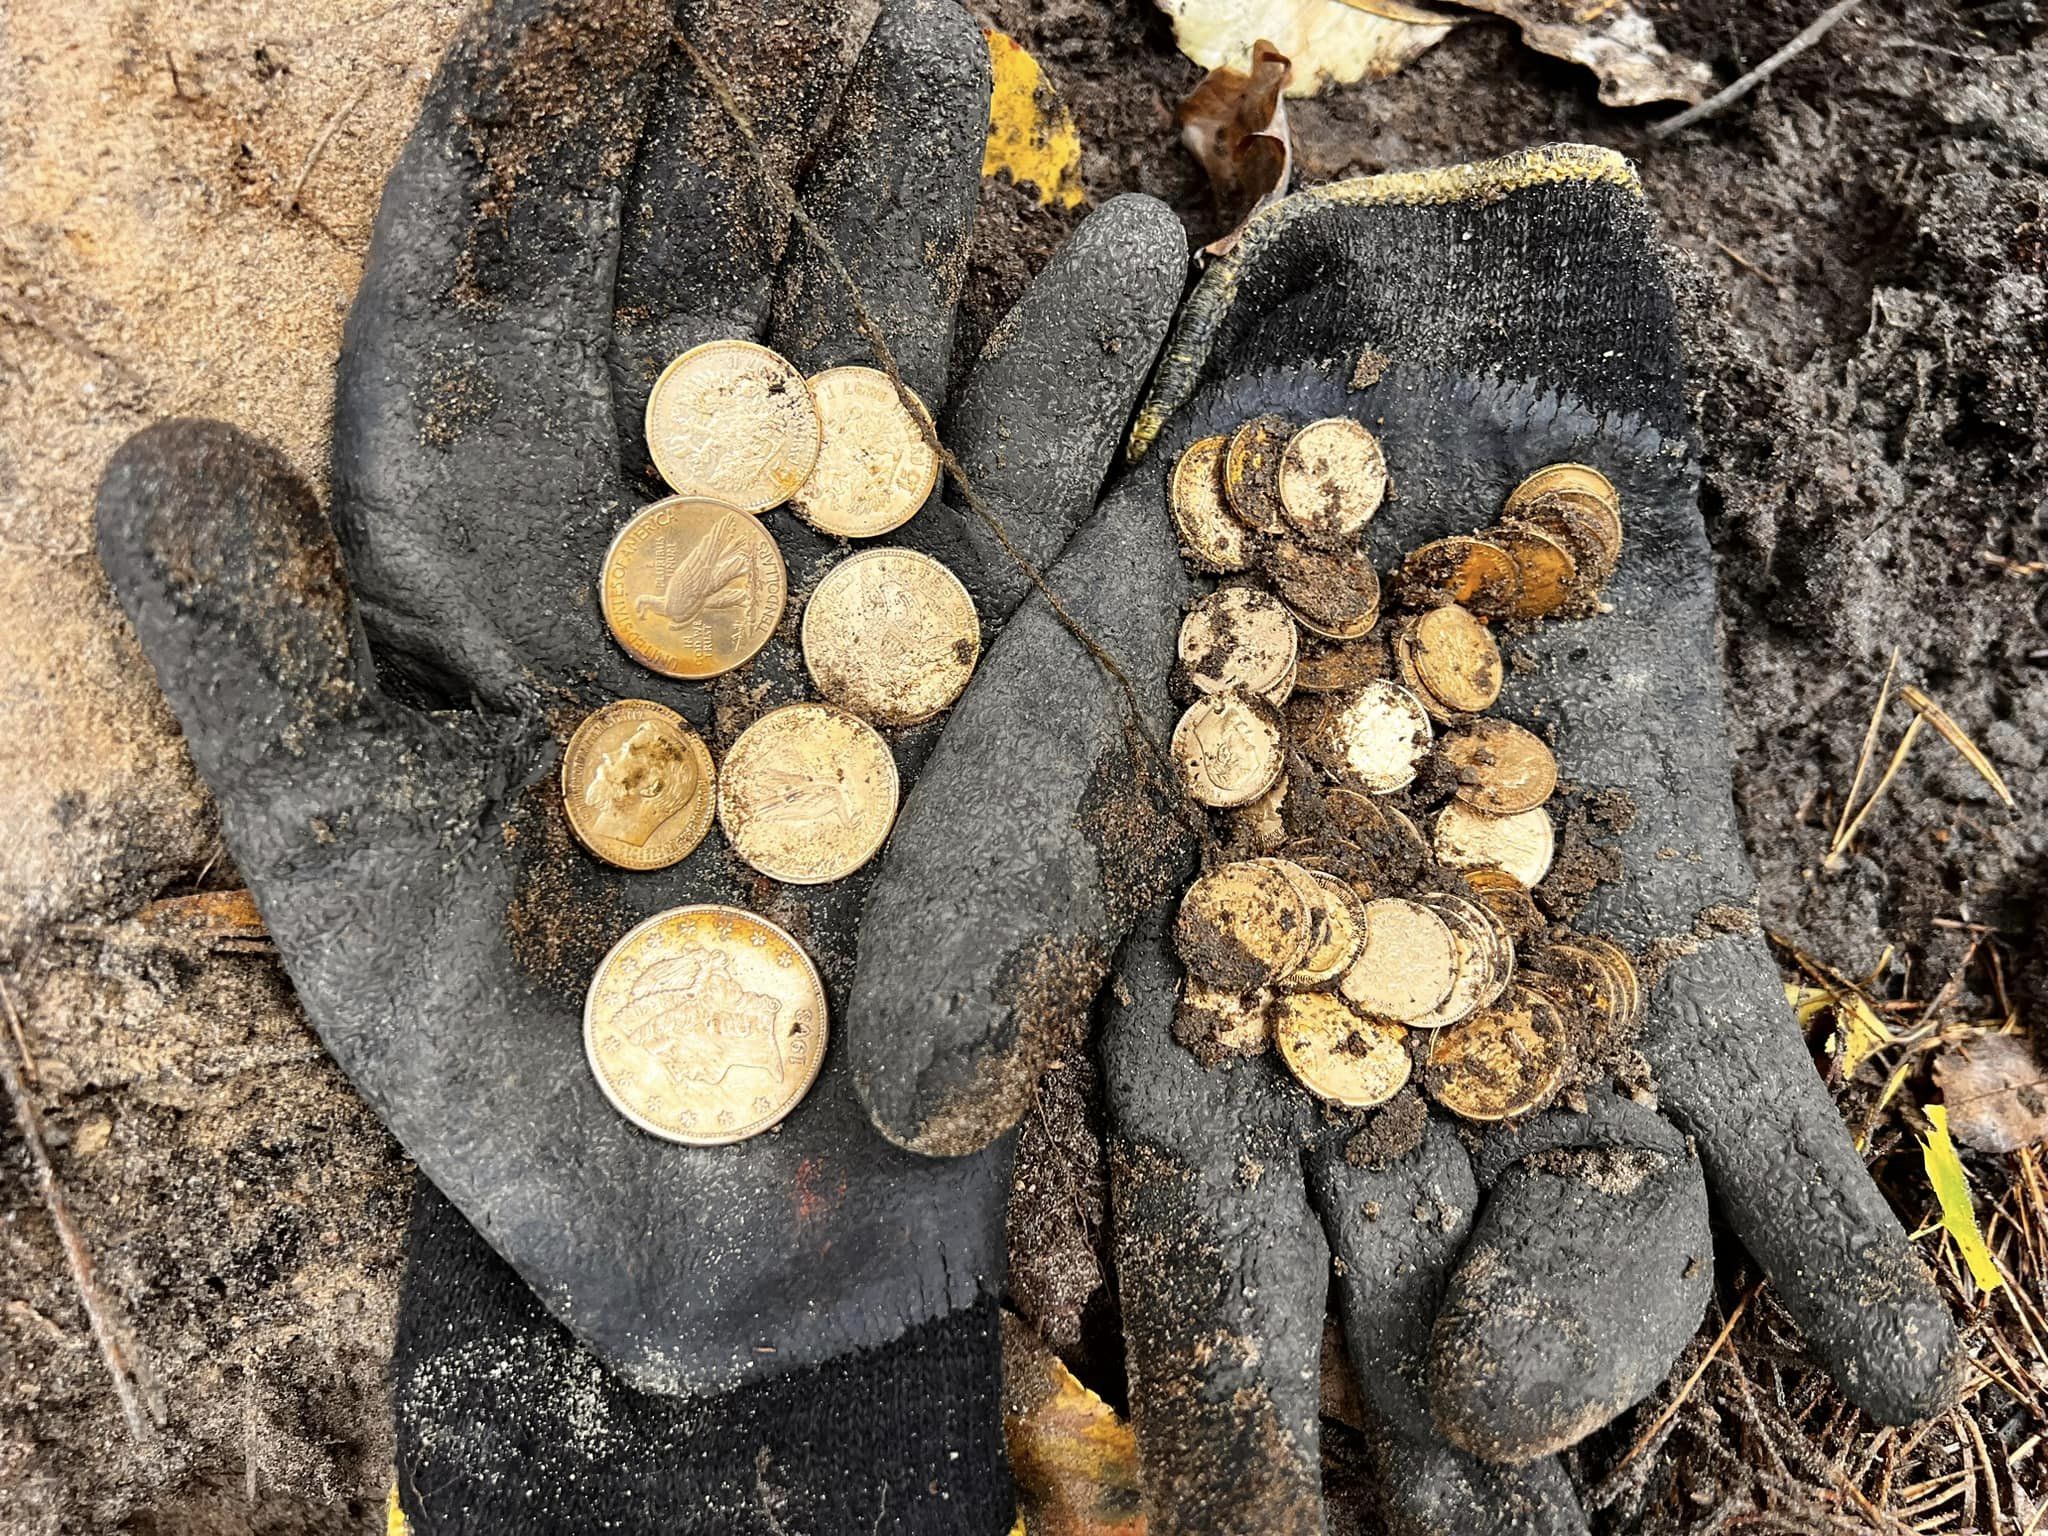 They went "to war" in Poland, discovered a treasure trove of gold coins